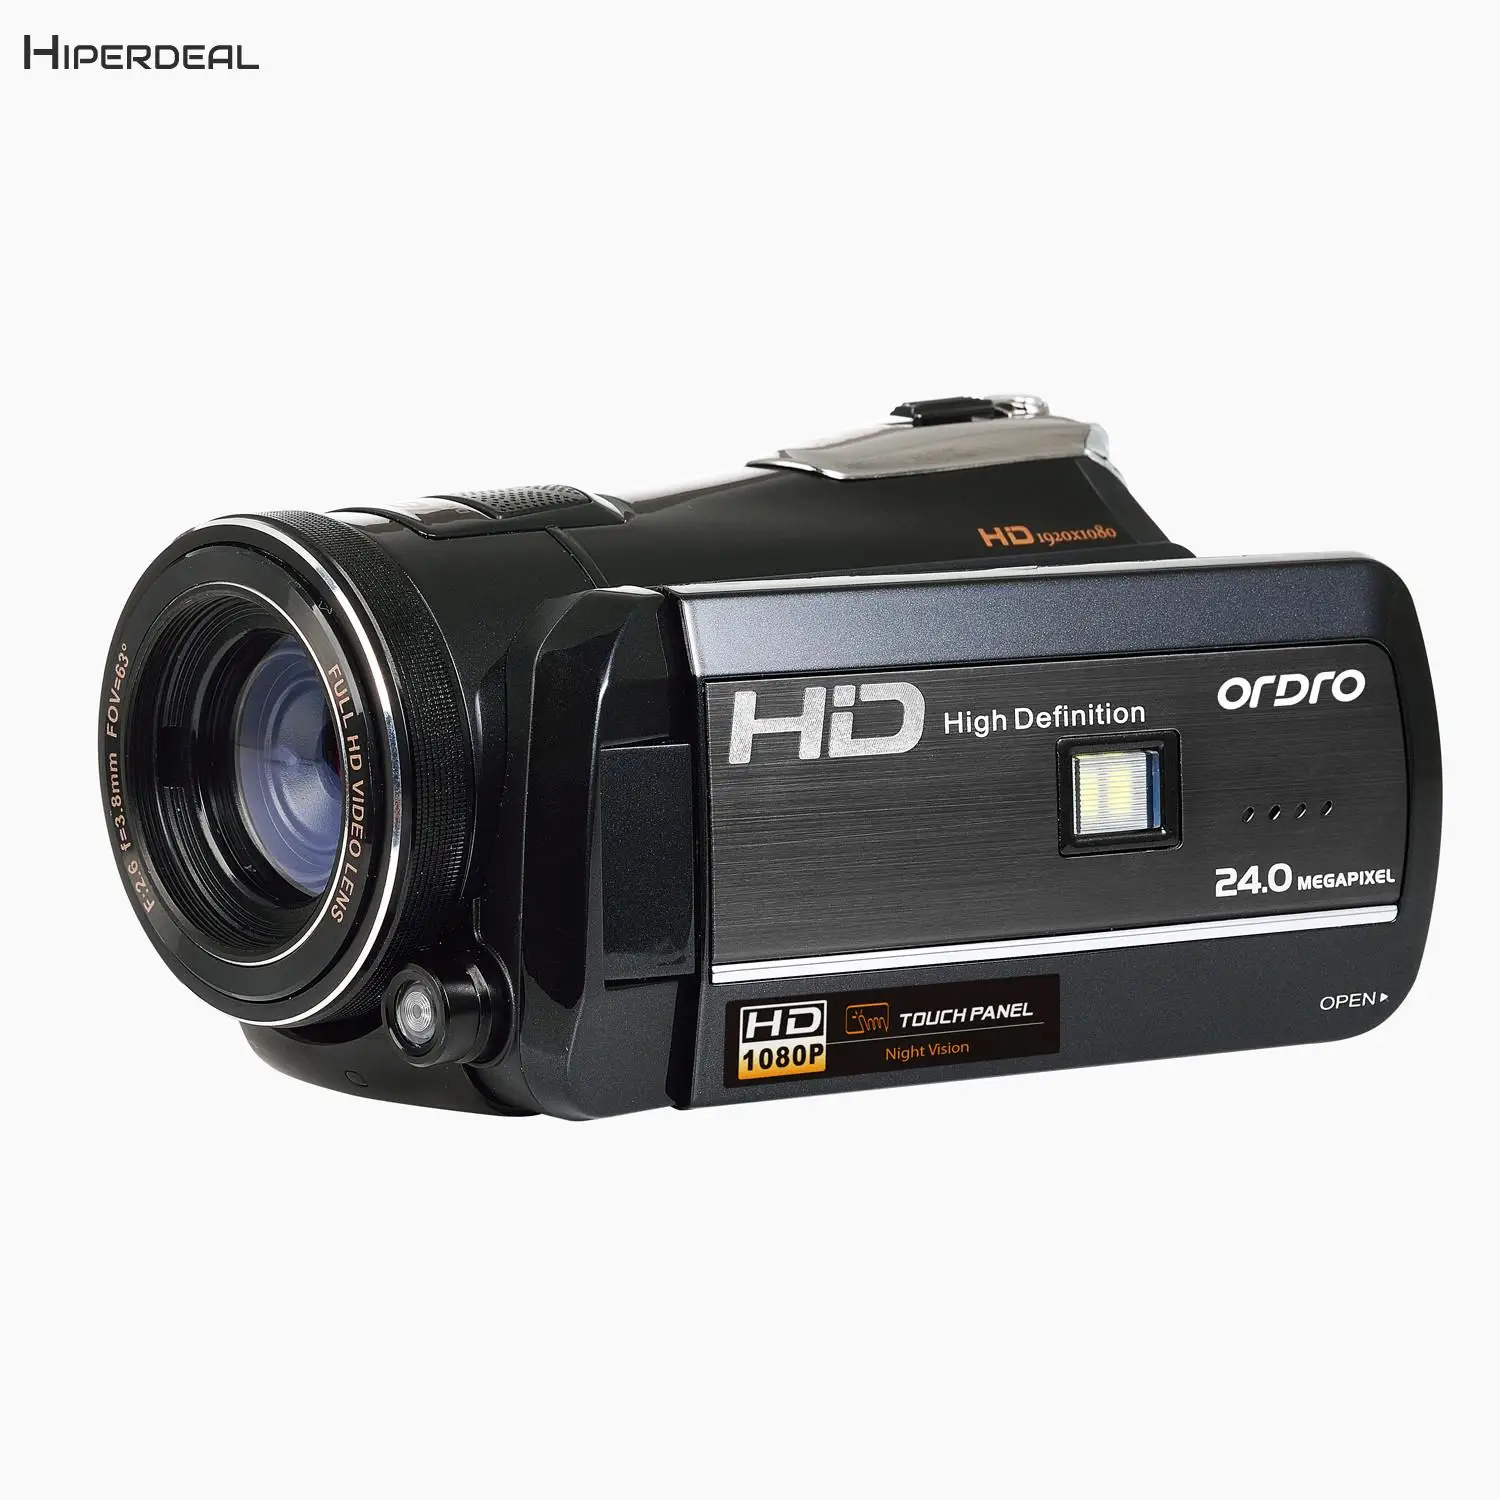 

HIPERDEAL ORDRO HDV-D395 1080P FHD Camcorder Night Vision WIFI Video Camera 18X Digital Zoom Sony CMOS Smile Face capture APP DV